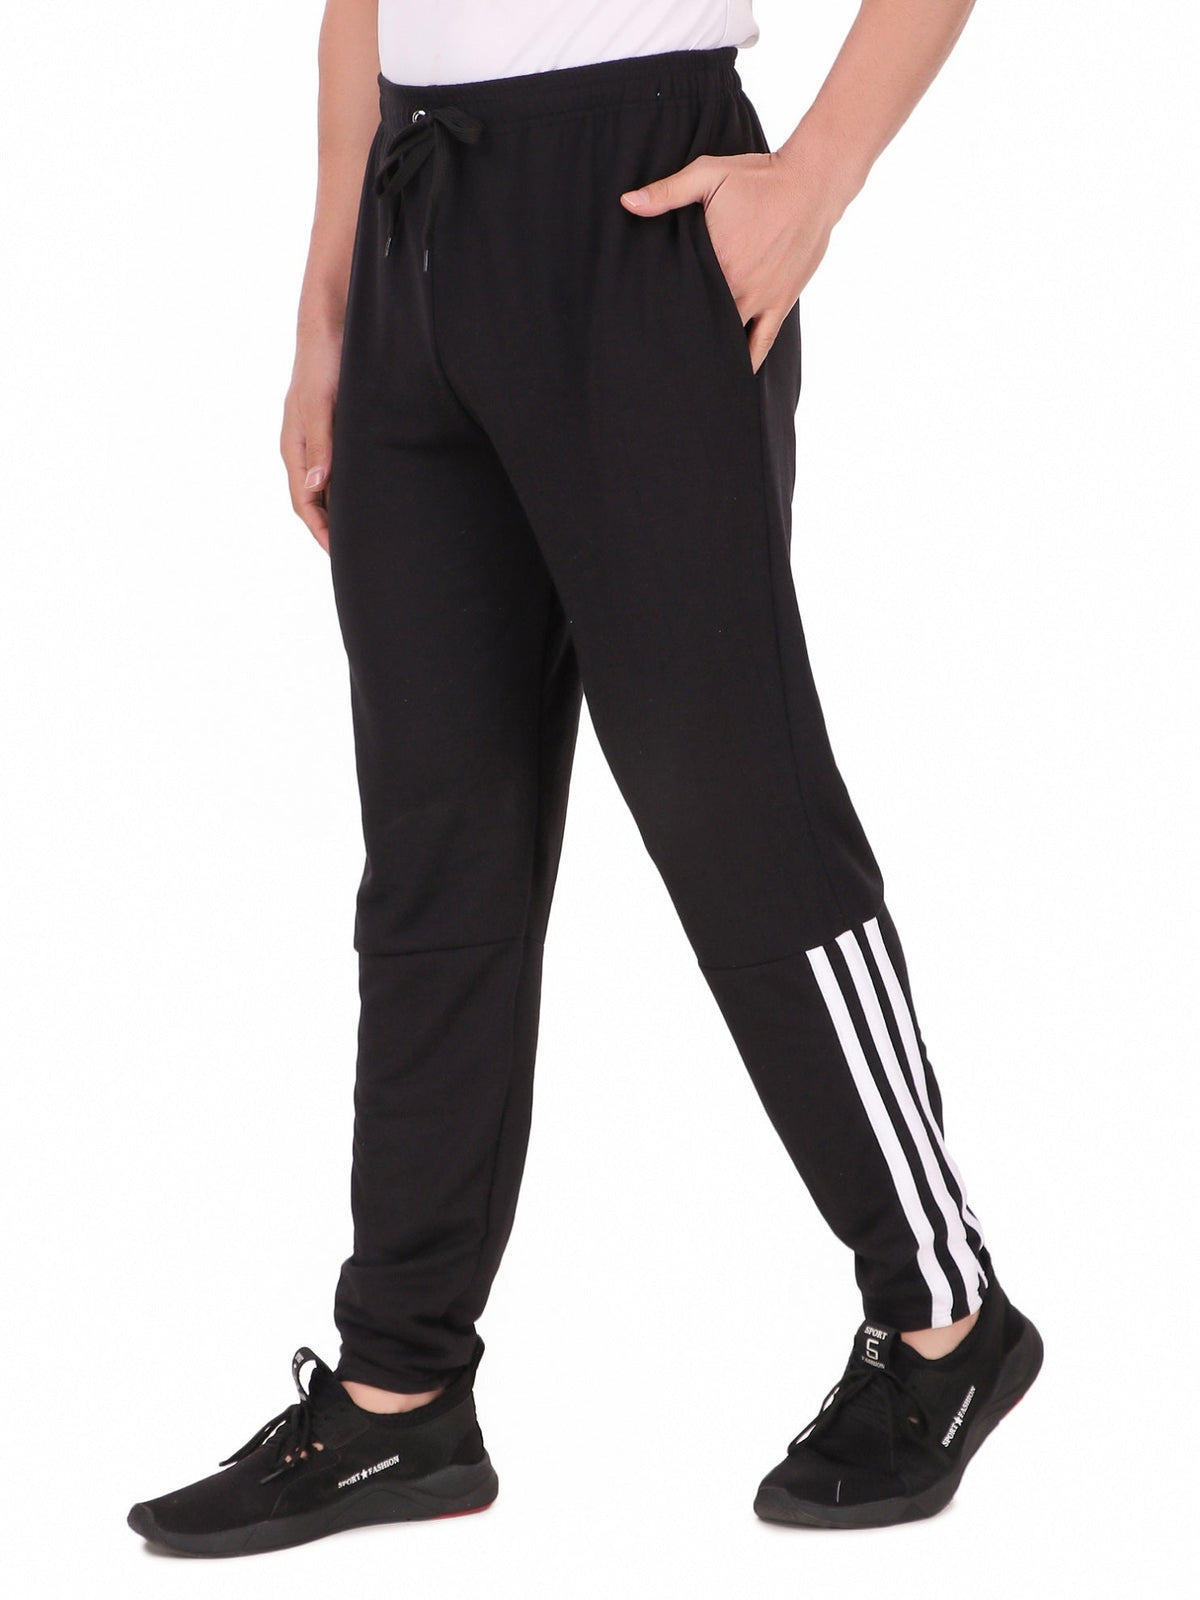 Buy Adidas Track Pants Online In India At Lowest Prices | Tata CLiQ